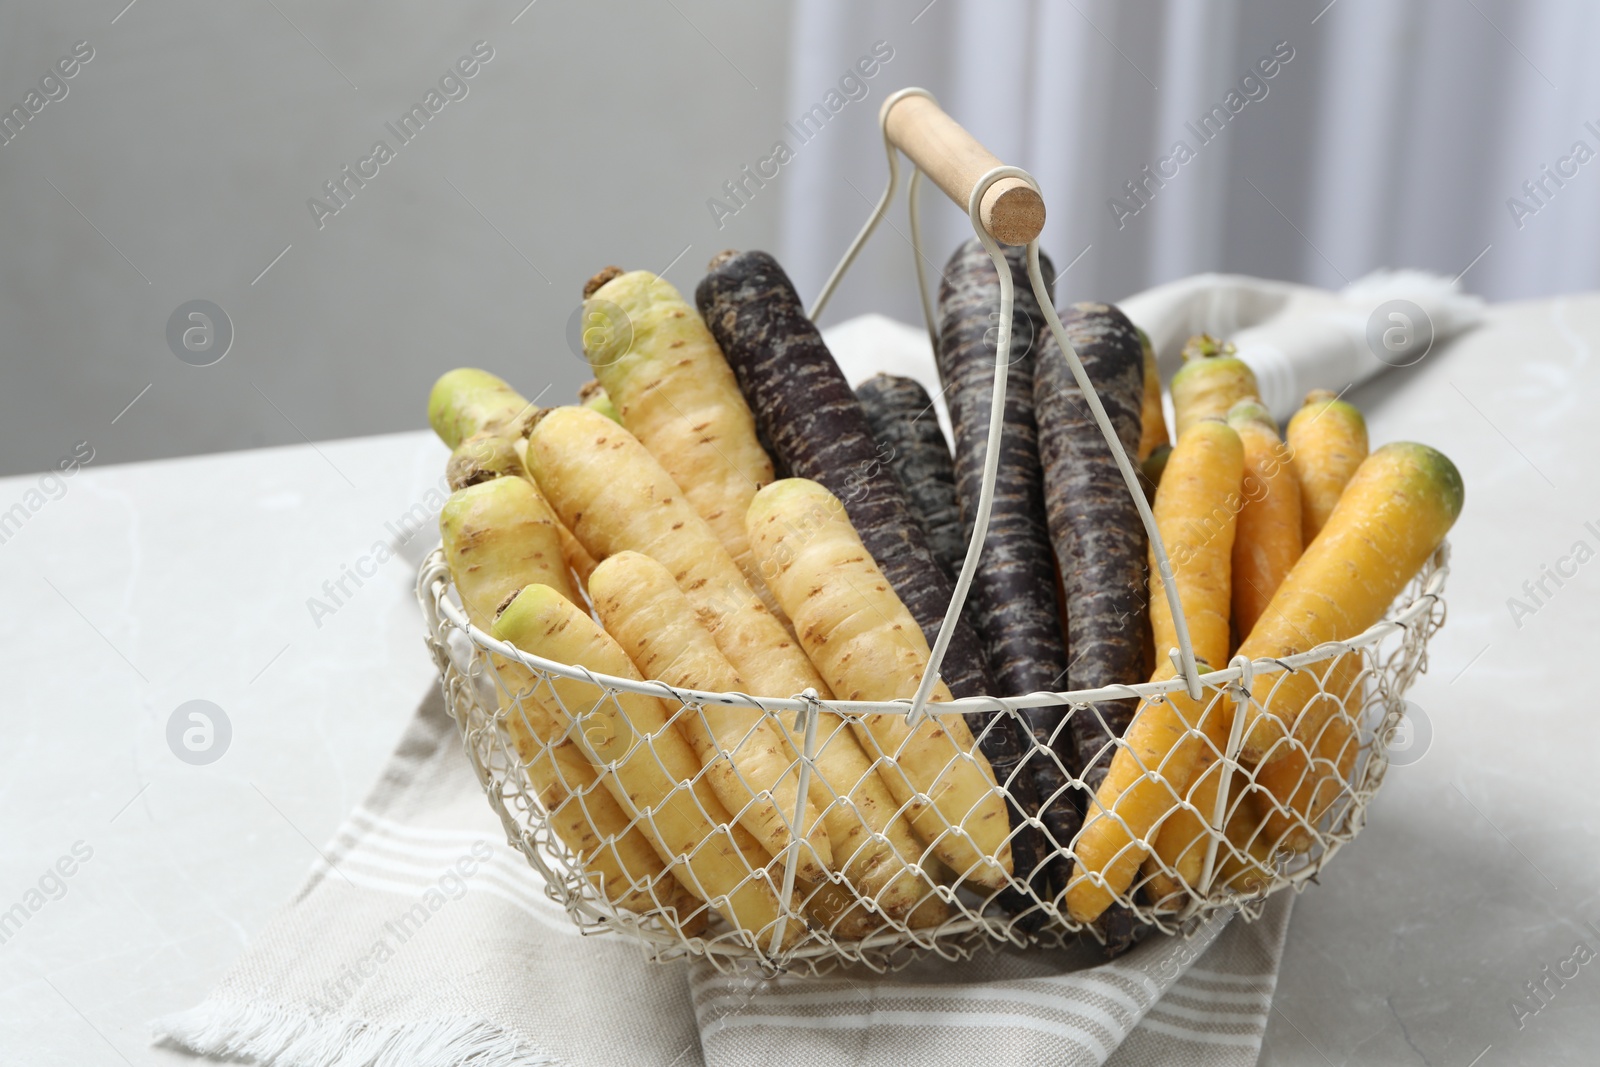 Photo of Many different raw carrots in metal basket on table